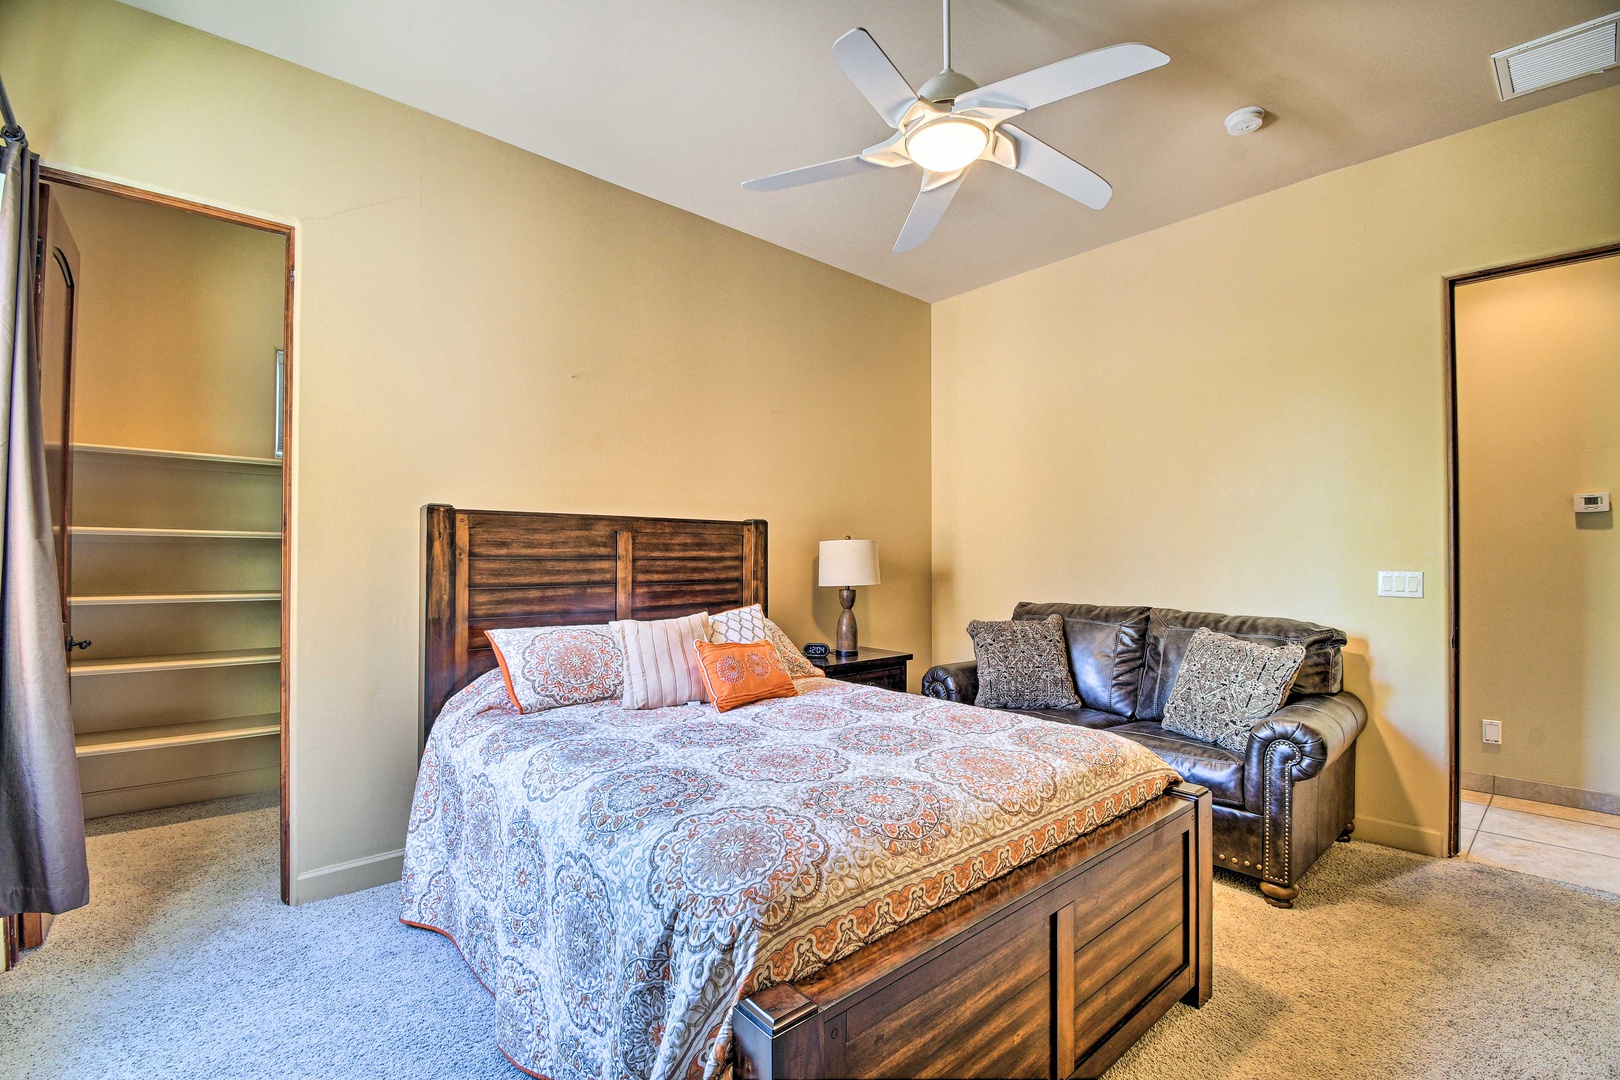 This bedroom includes a comfy queen bed & couch